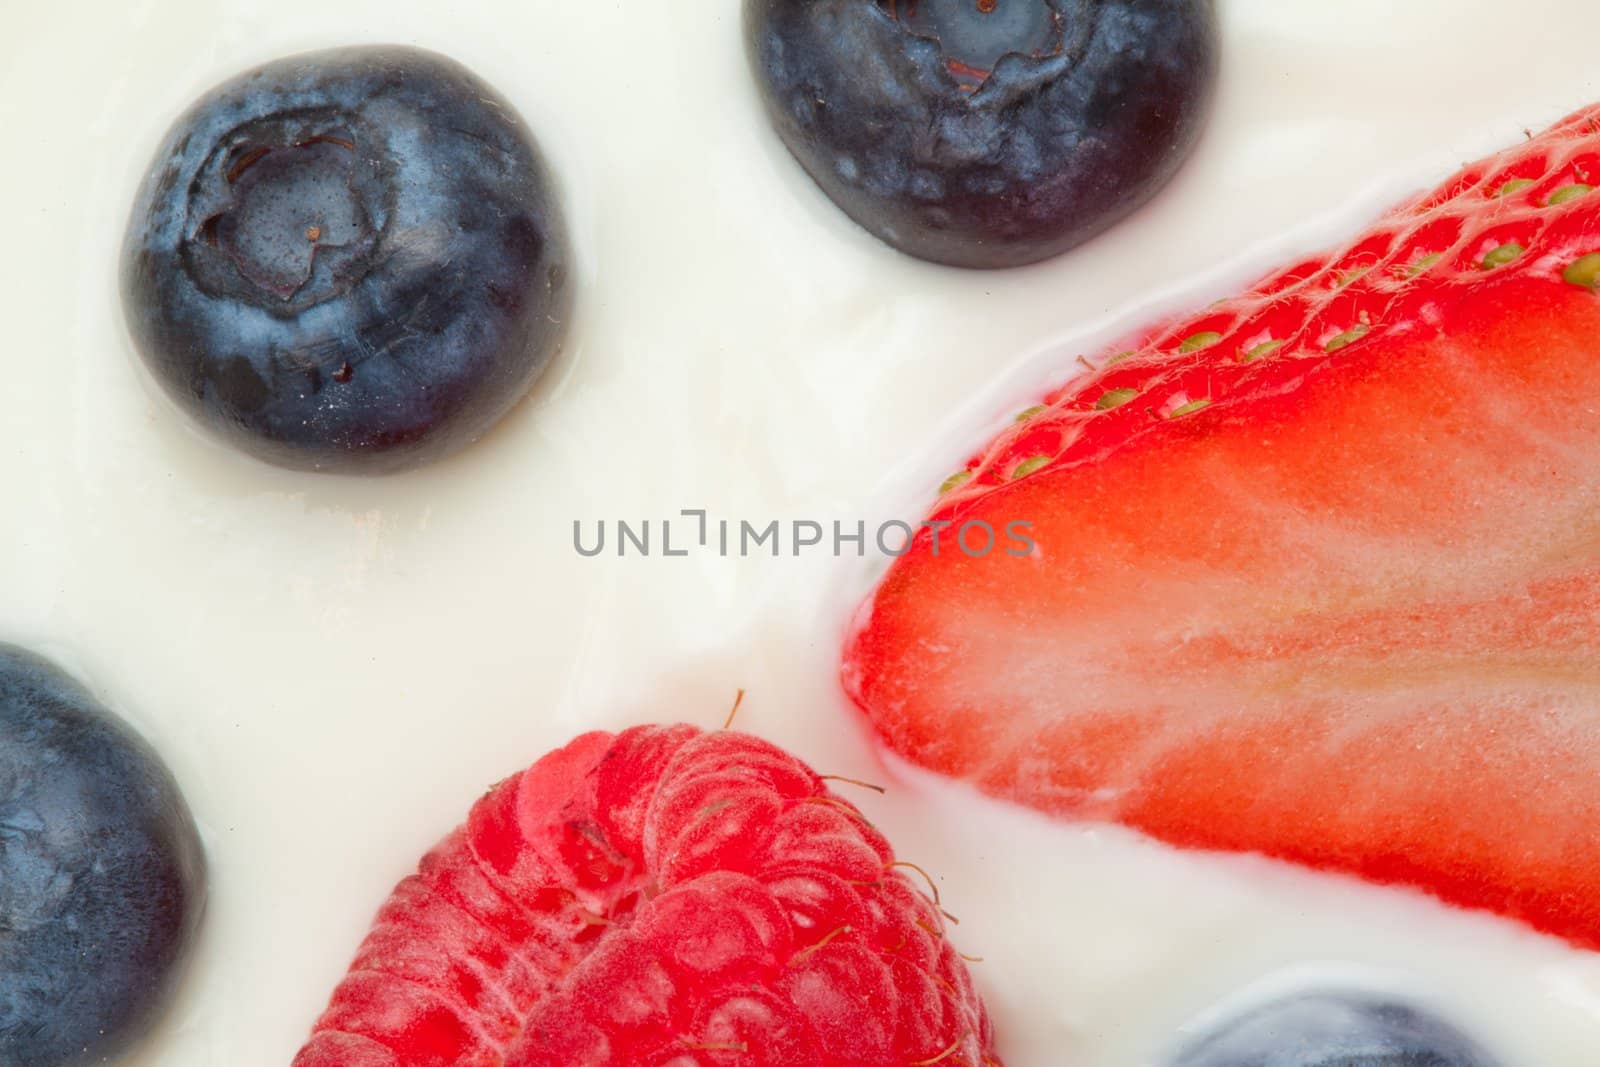 Slice berries on the cream in a high angle shot